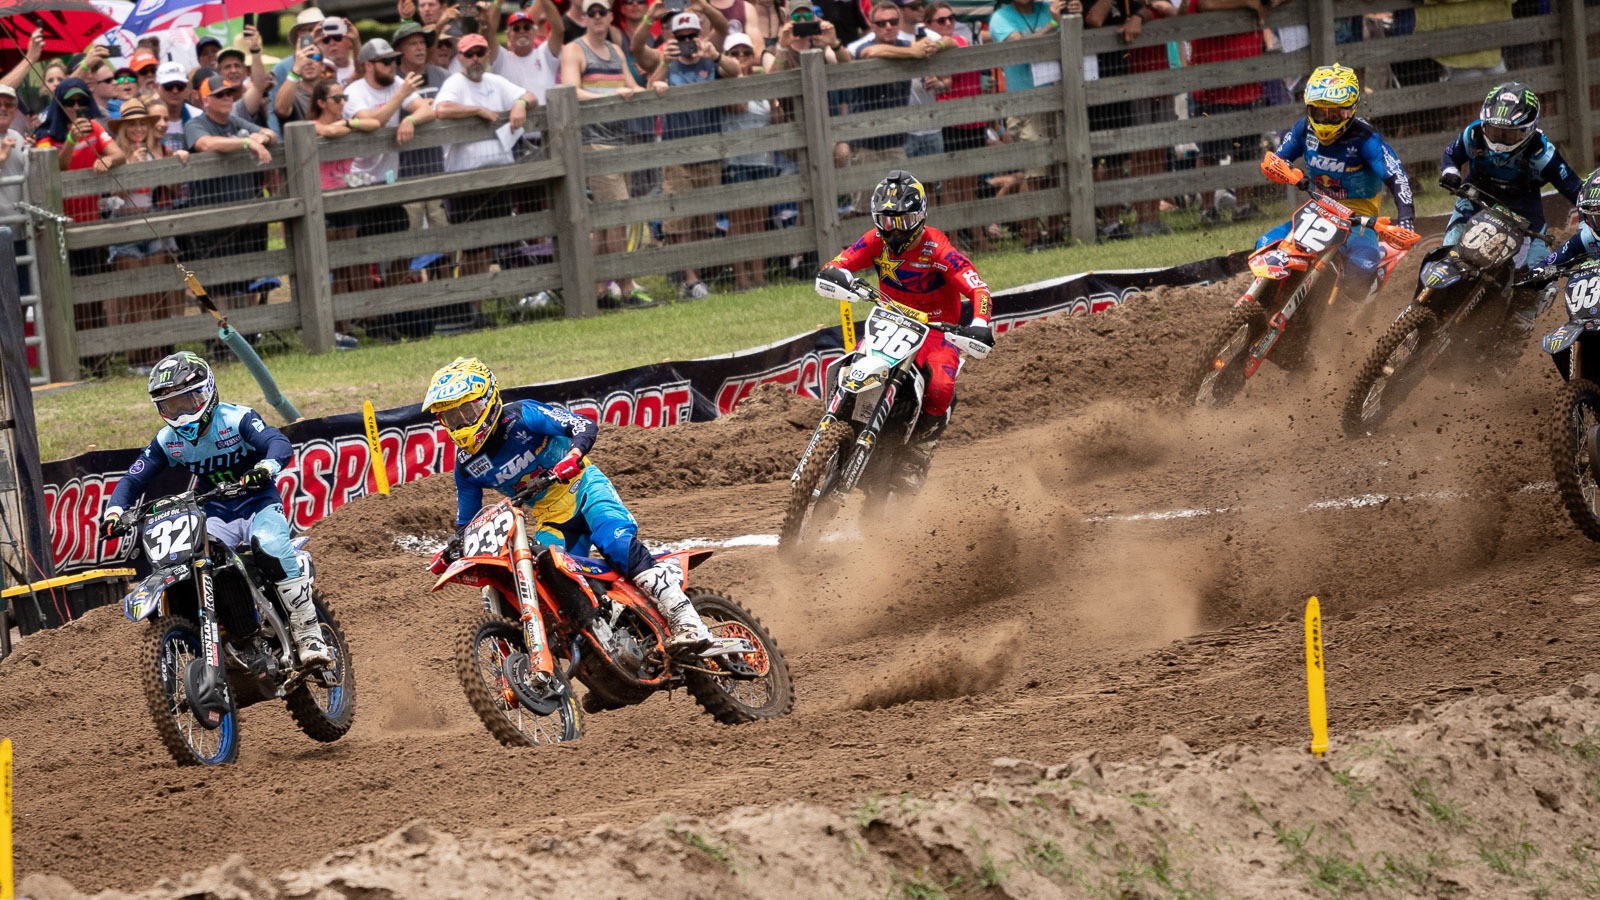 2019 Florida Motocross Race Report and Results Swapmoto Live